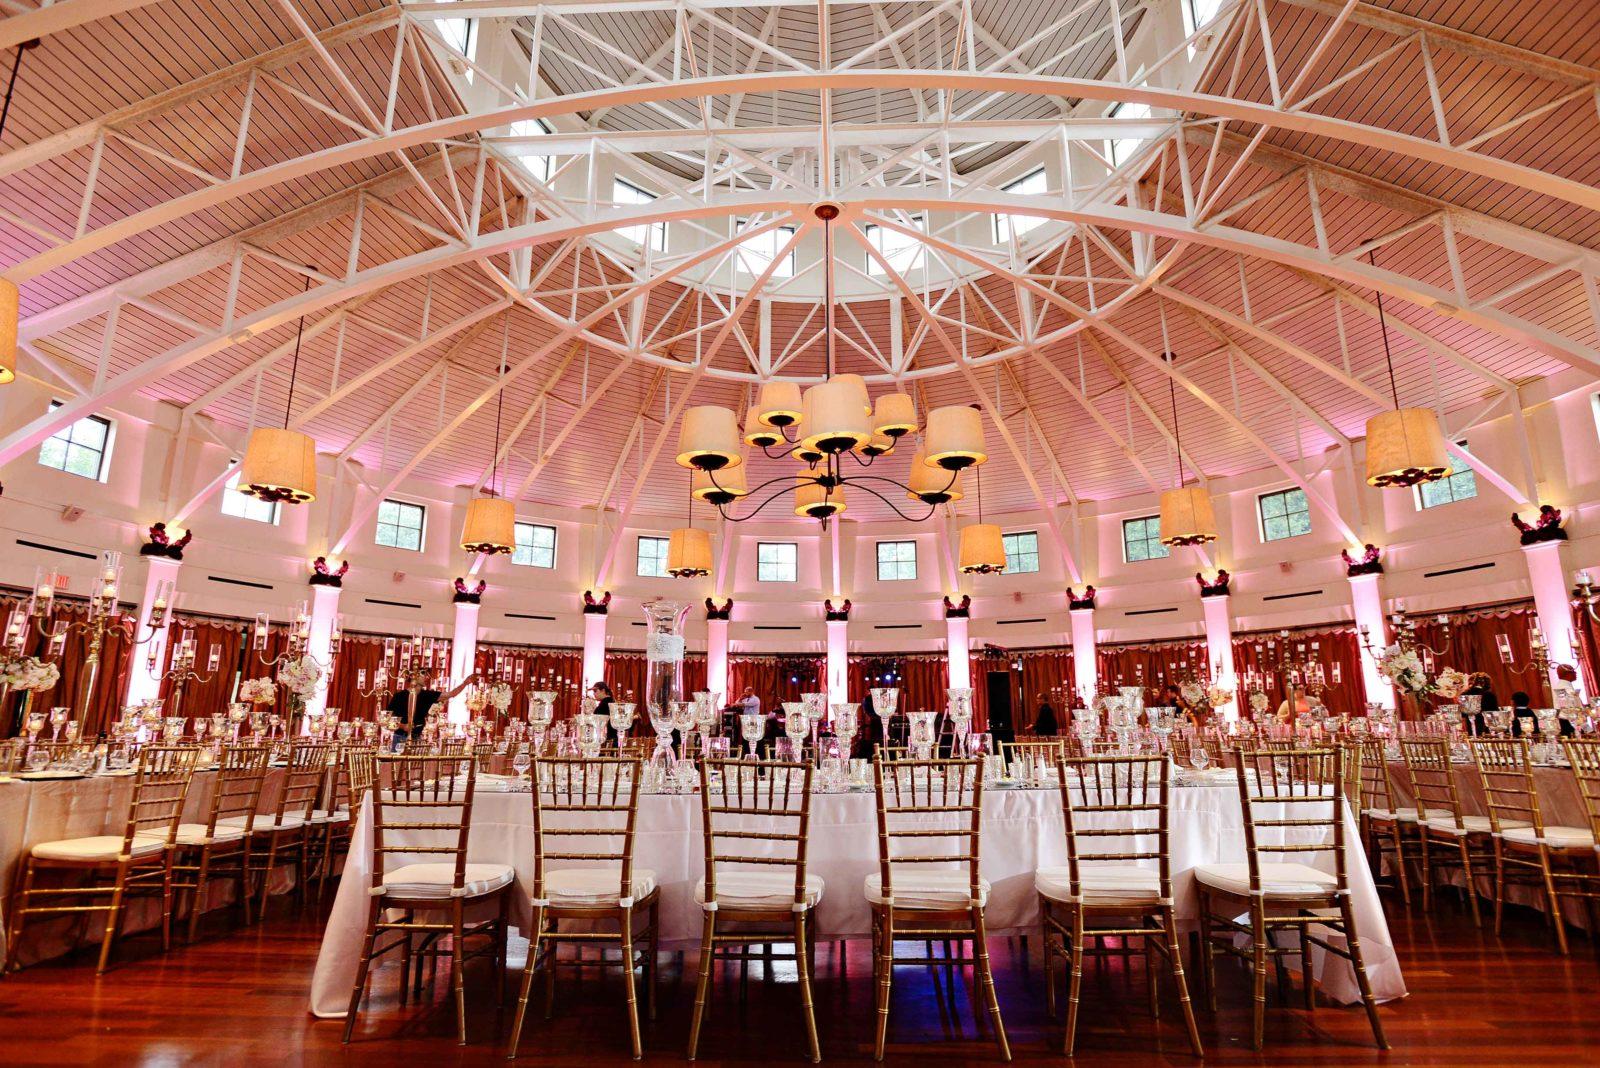 A wedding reception with pink up lights on the walls of the Audubon Tea Room. Photo: Studio Tran